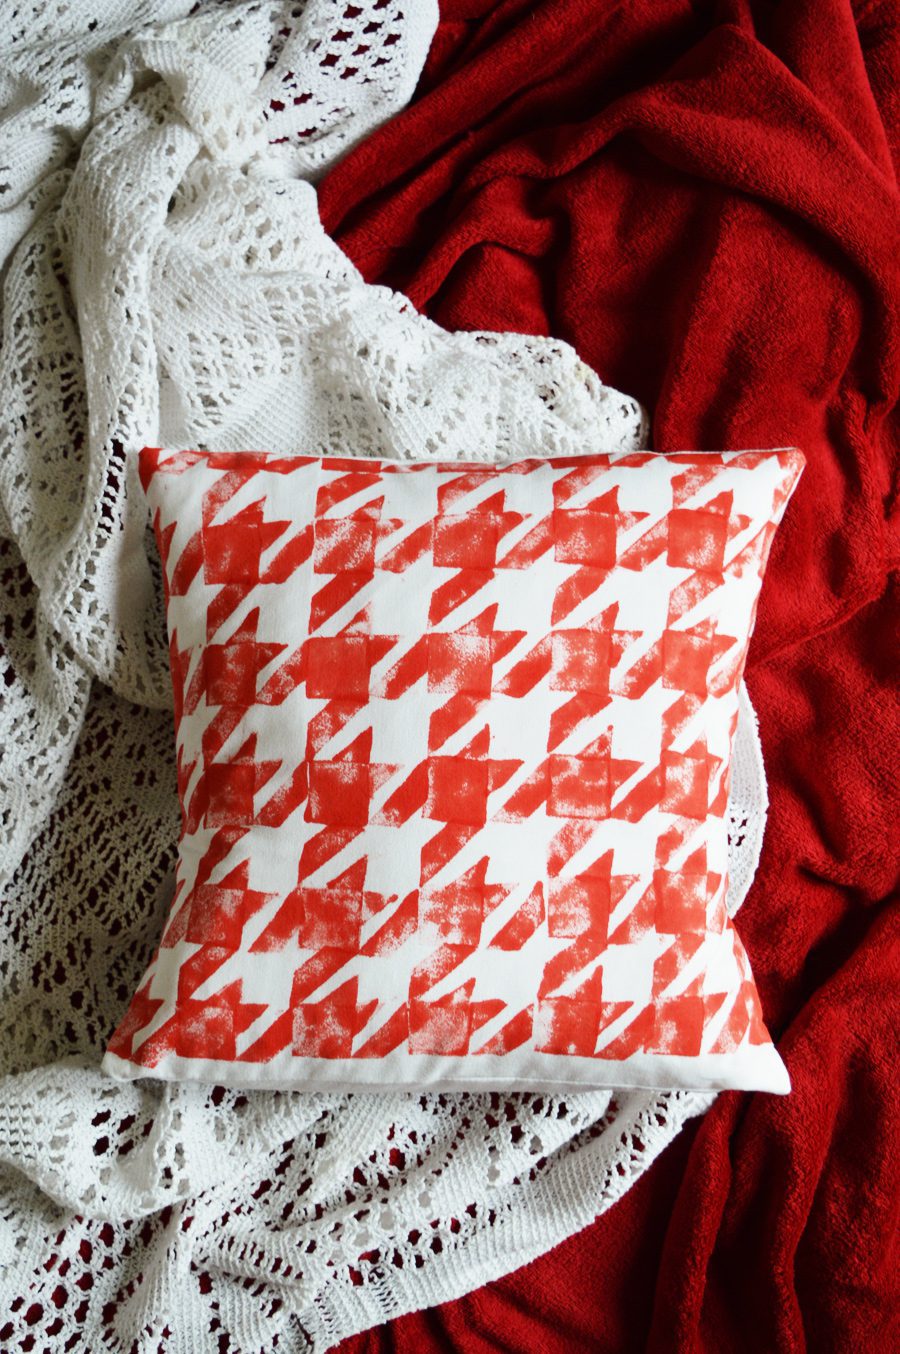 DIY houndstooth tutorial #stamping #fabric #sewing craftingfingers.co.uk